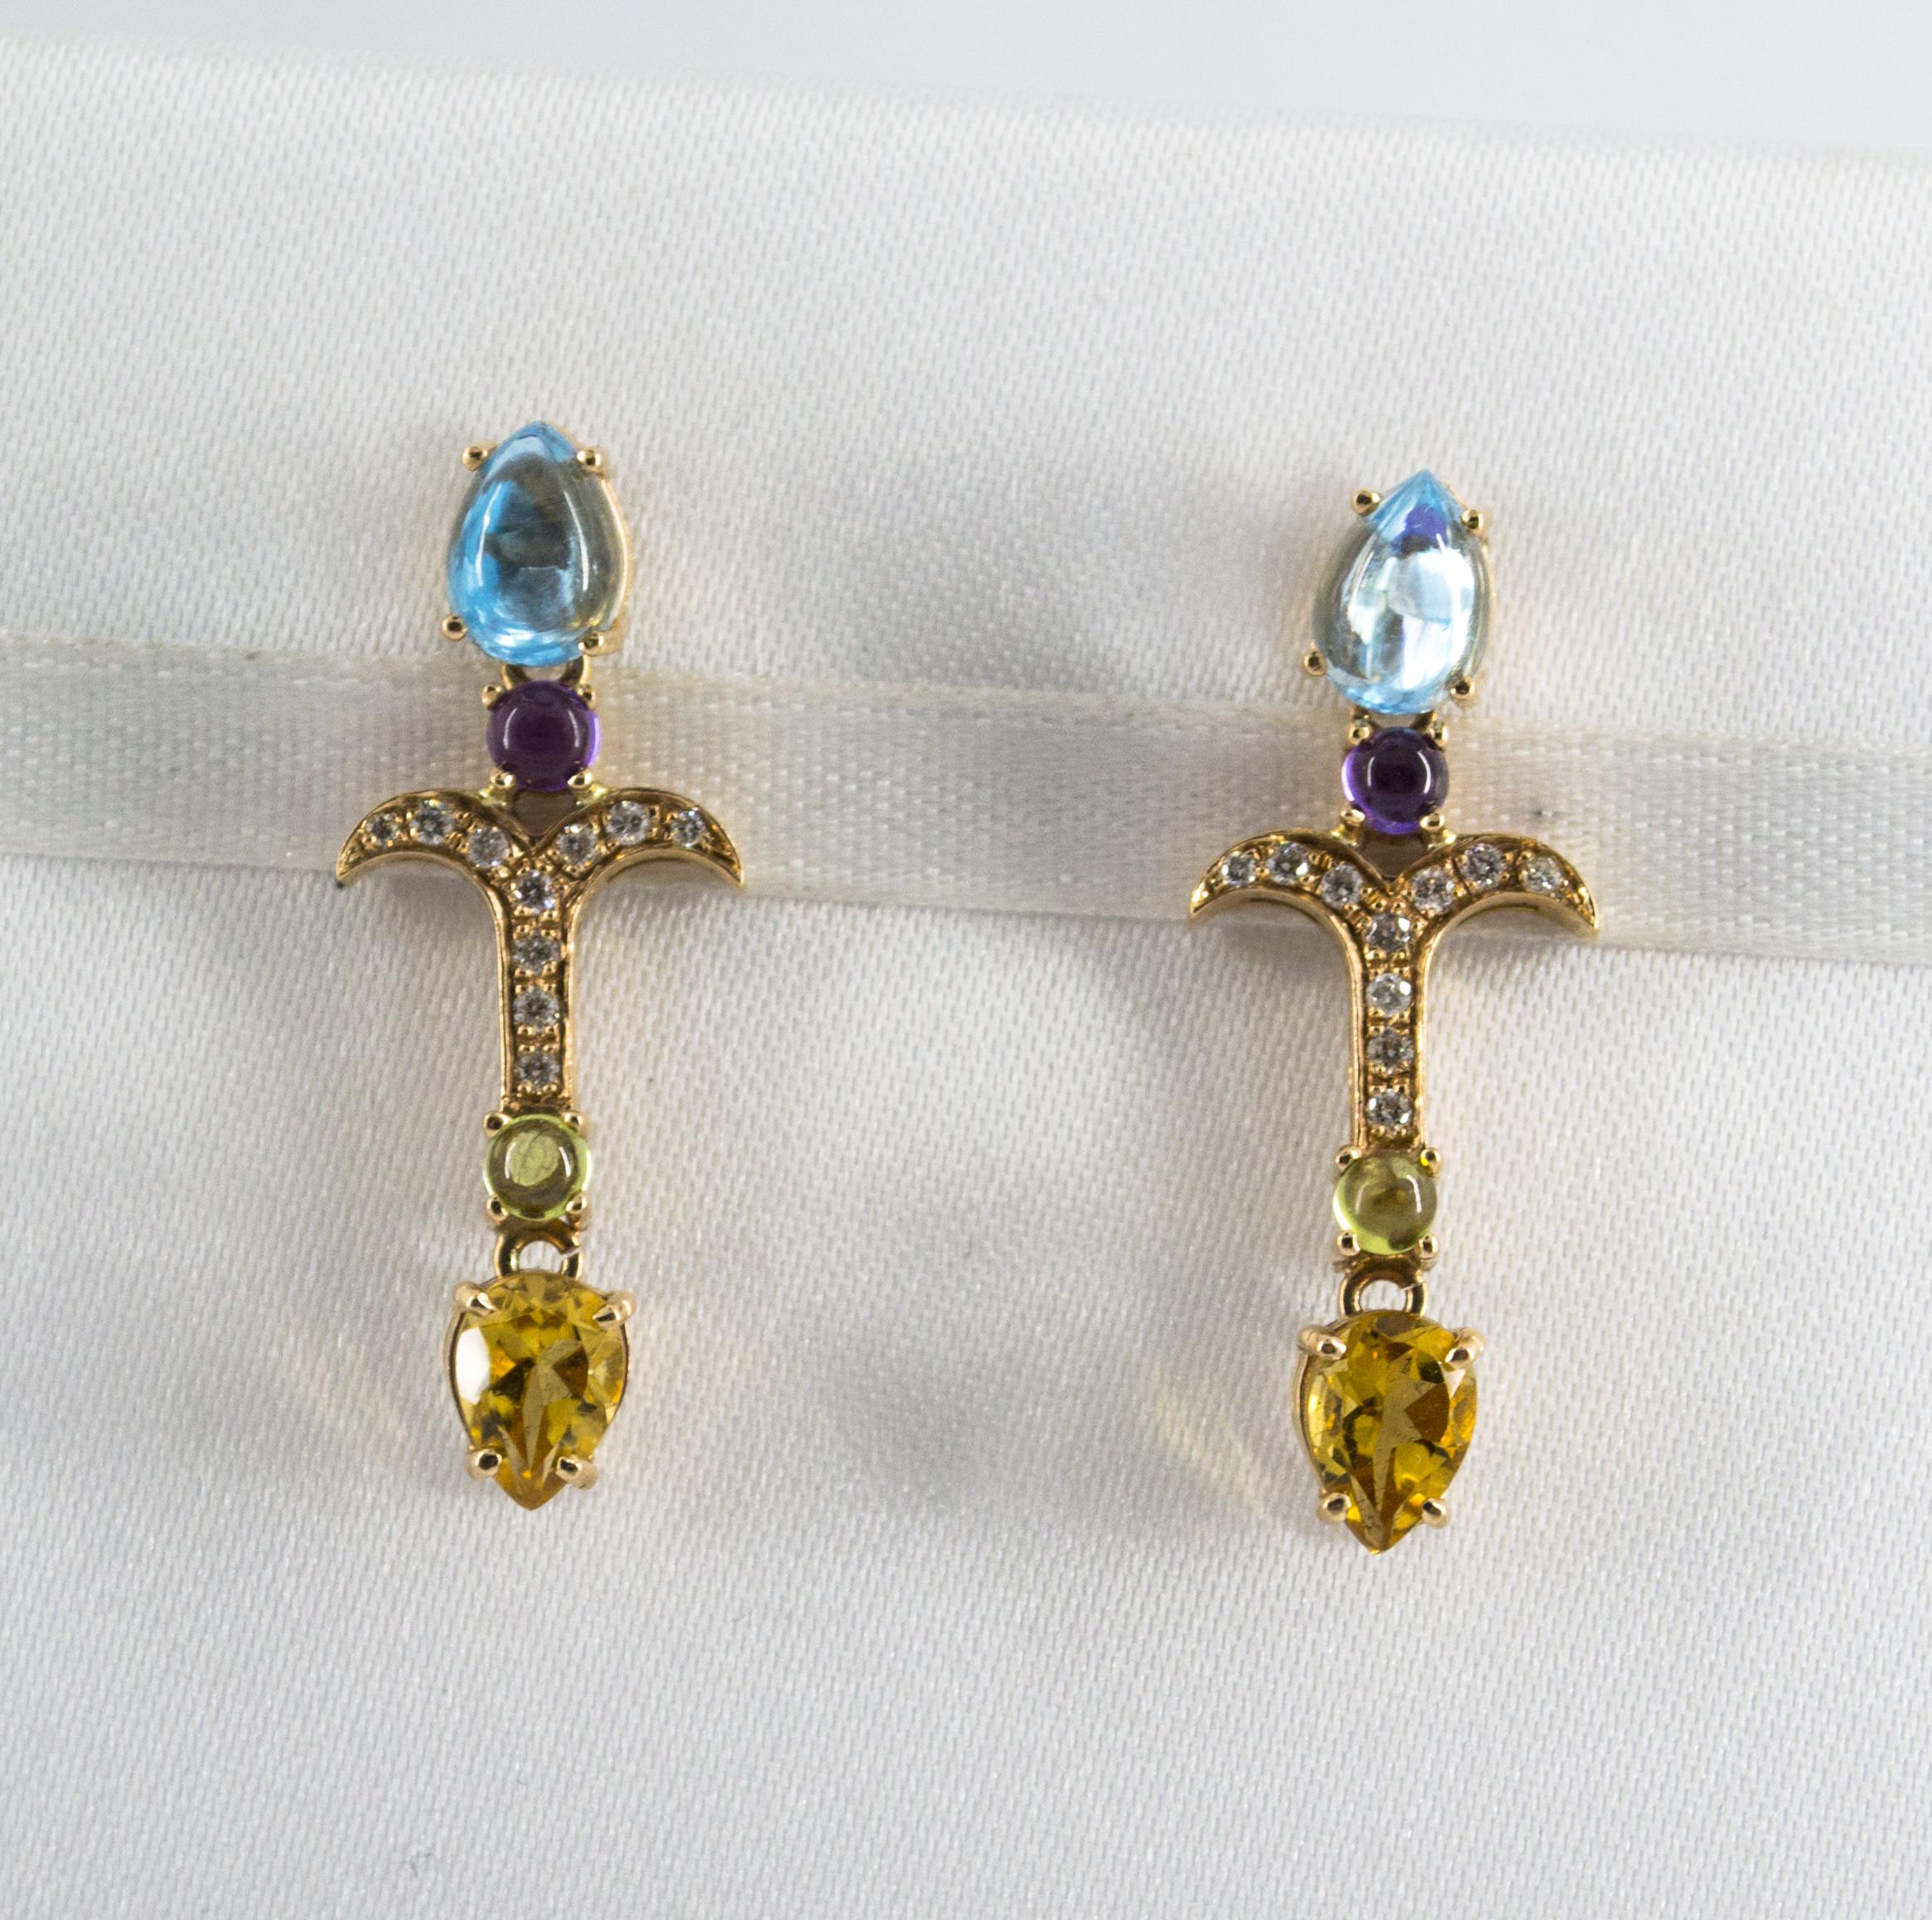 These Earrings are made of 9K Yellow Gold.
These Earrings have 0.20 Carats of White Diamonds.
These Earrings have also Blue Topaz, Peridot, Amethyst and Citrine.
All our Earrings have pins for pierced ears but we can change the closure and make any